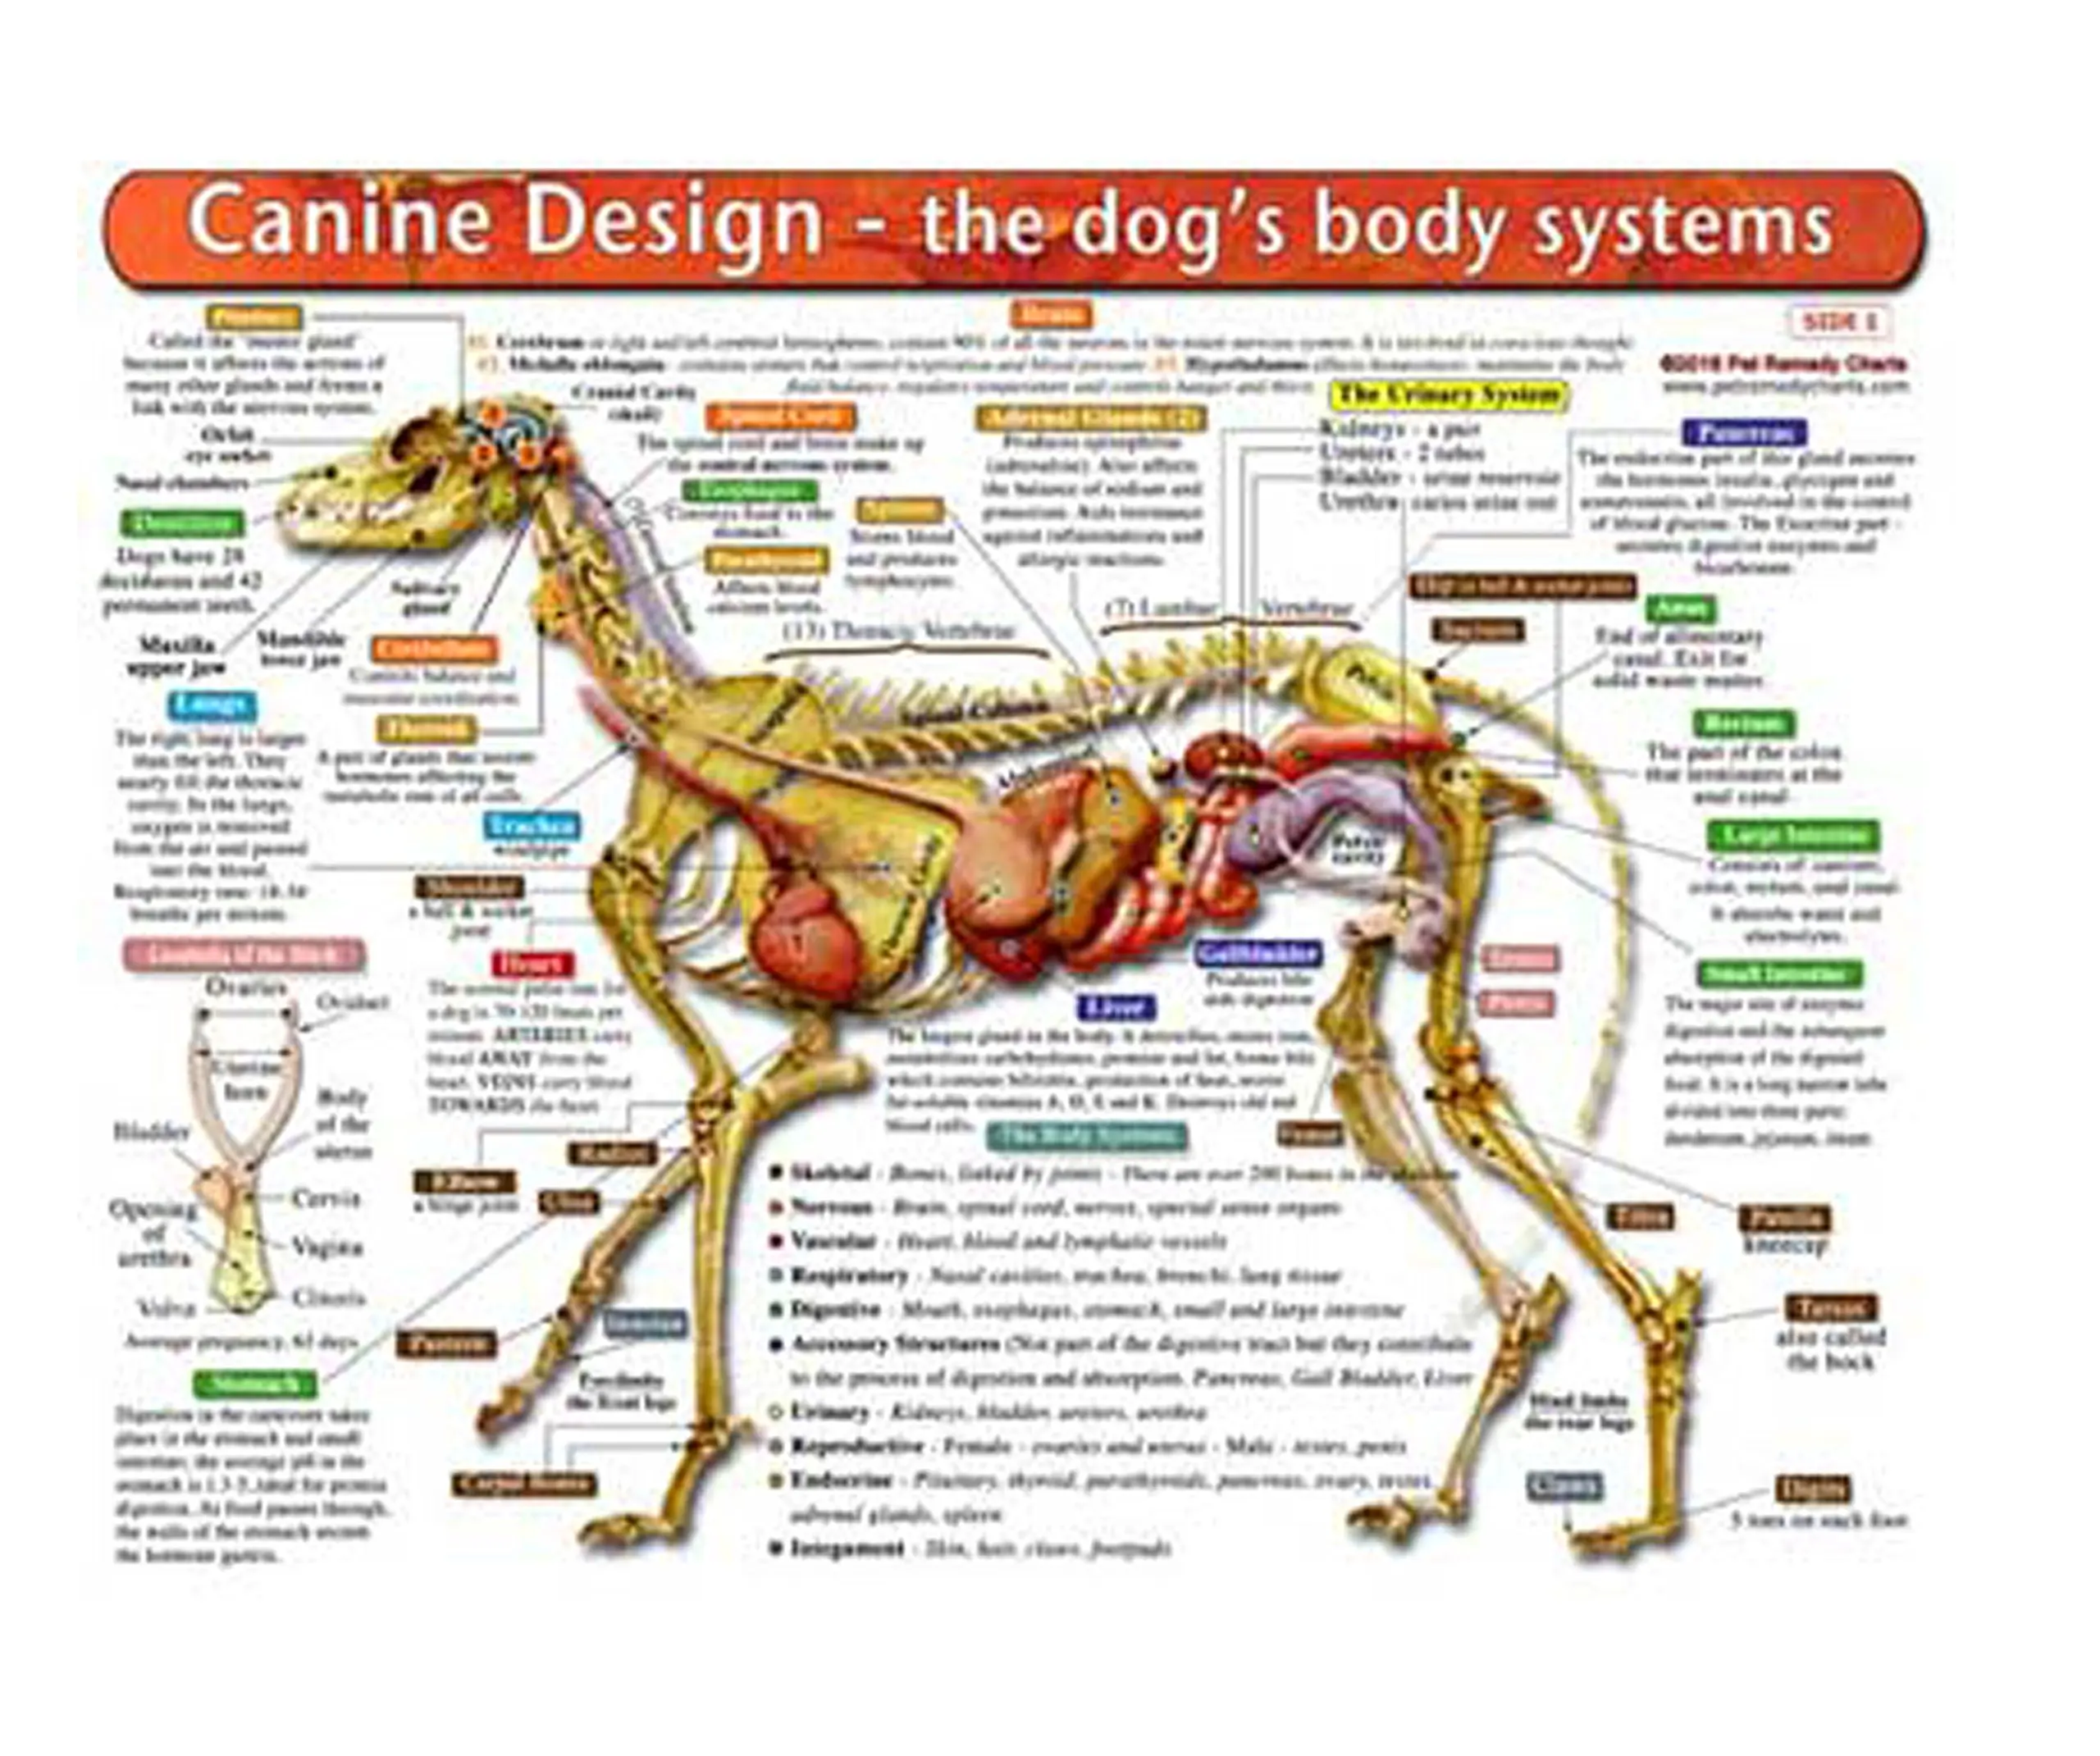 Buy The Dogs Body Systems A DoubleSided, UV Protected, Laminated Dog